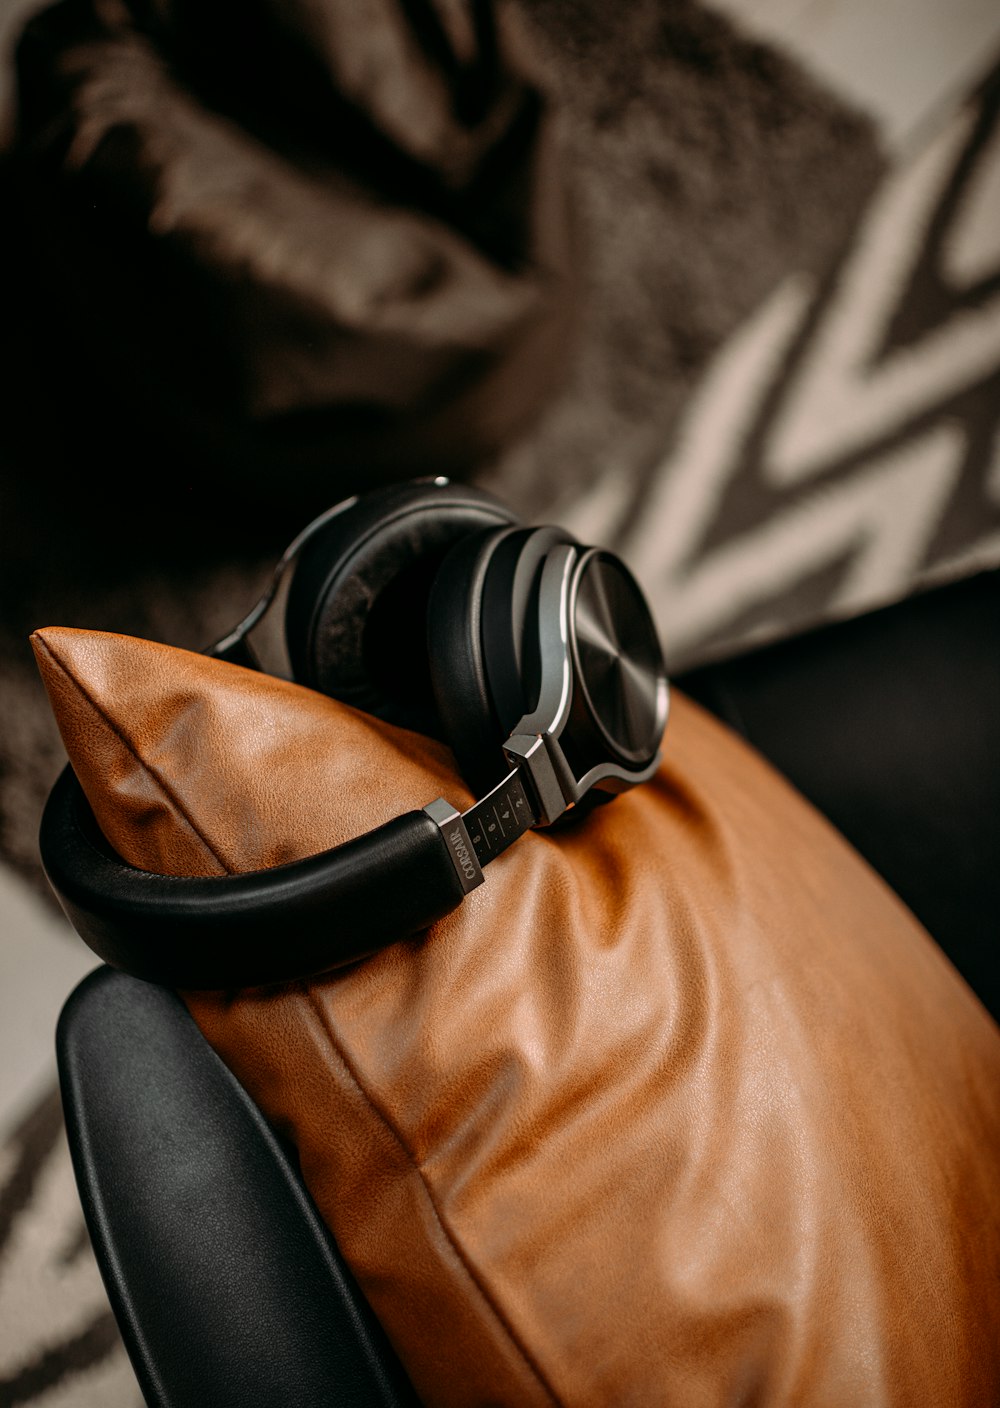 a person wearing a black headphone